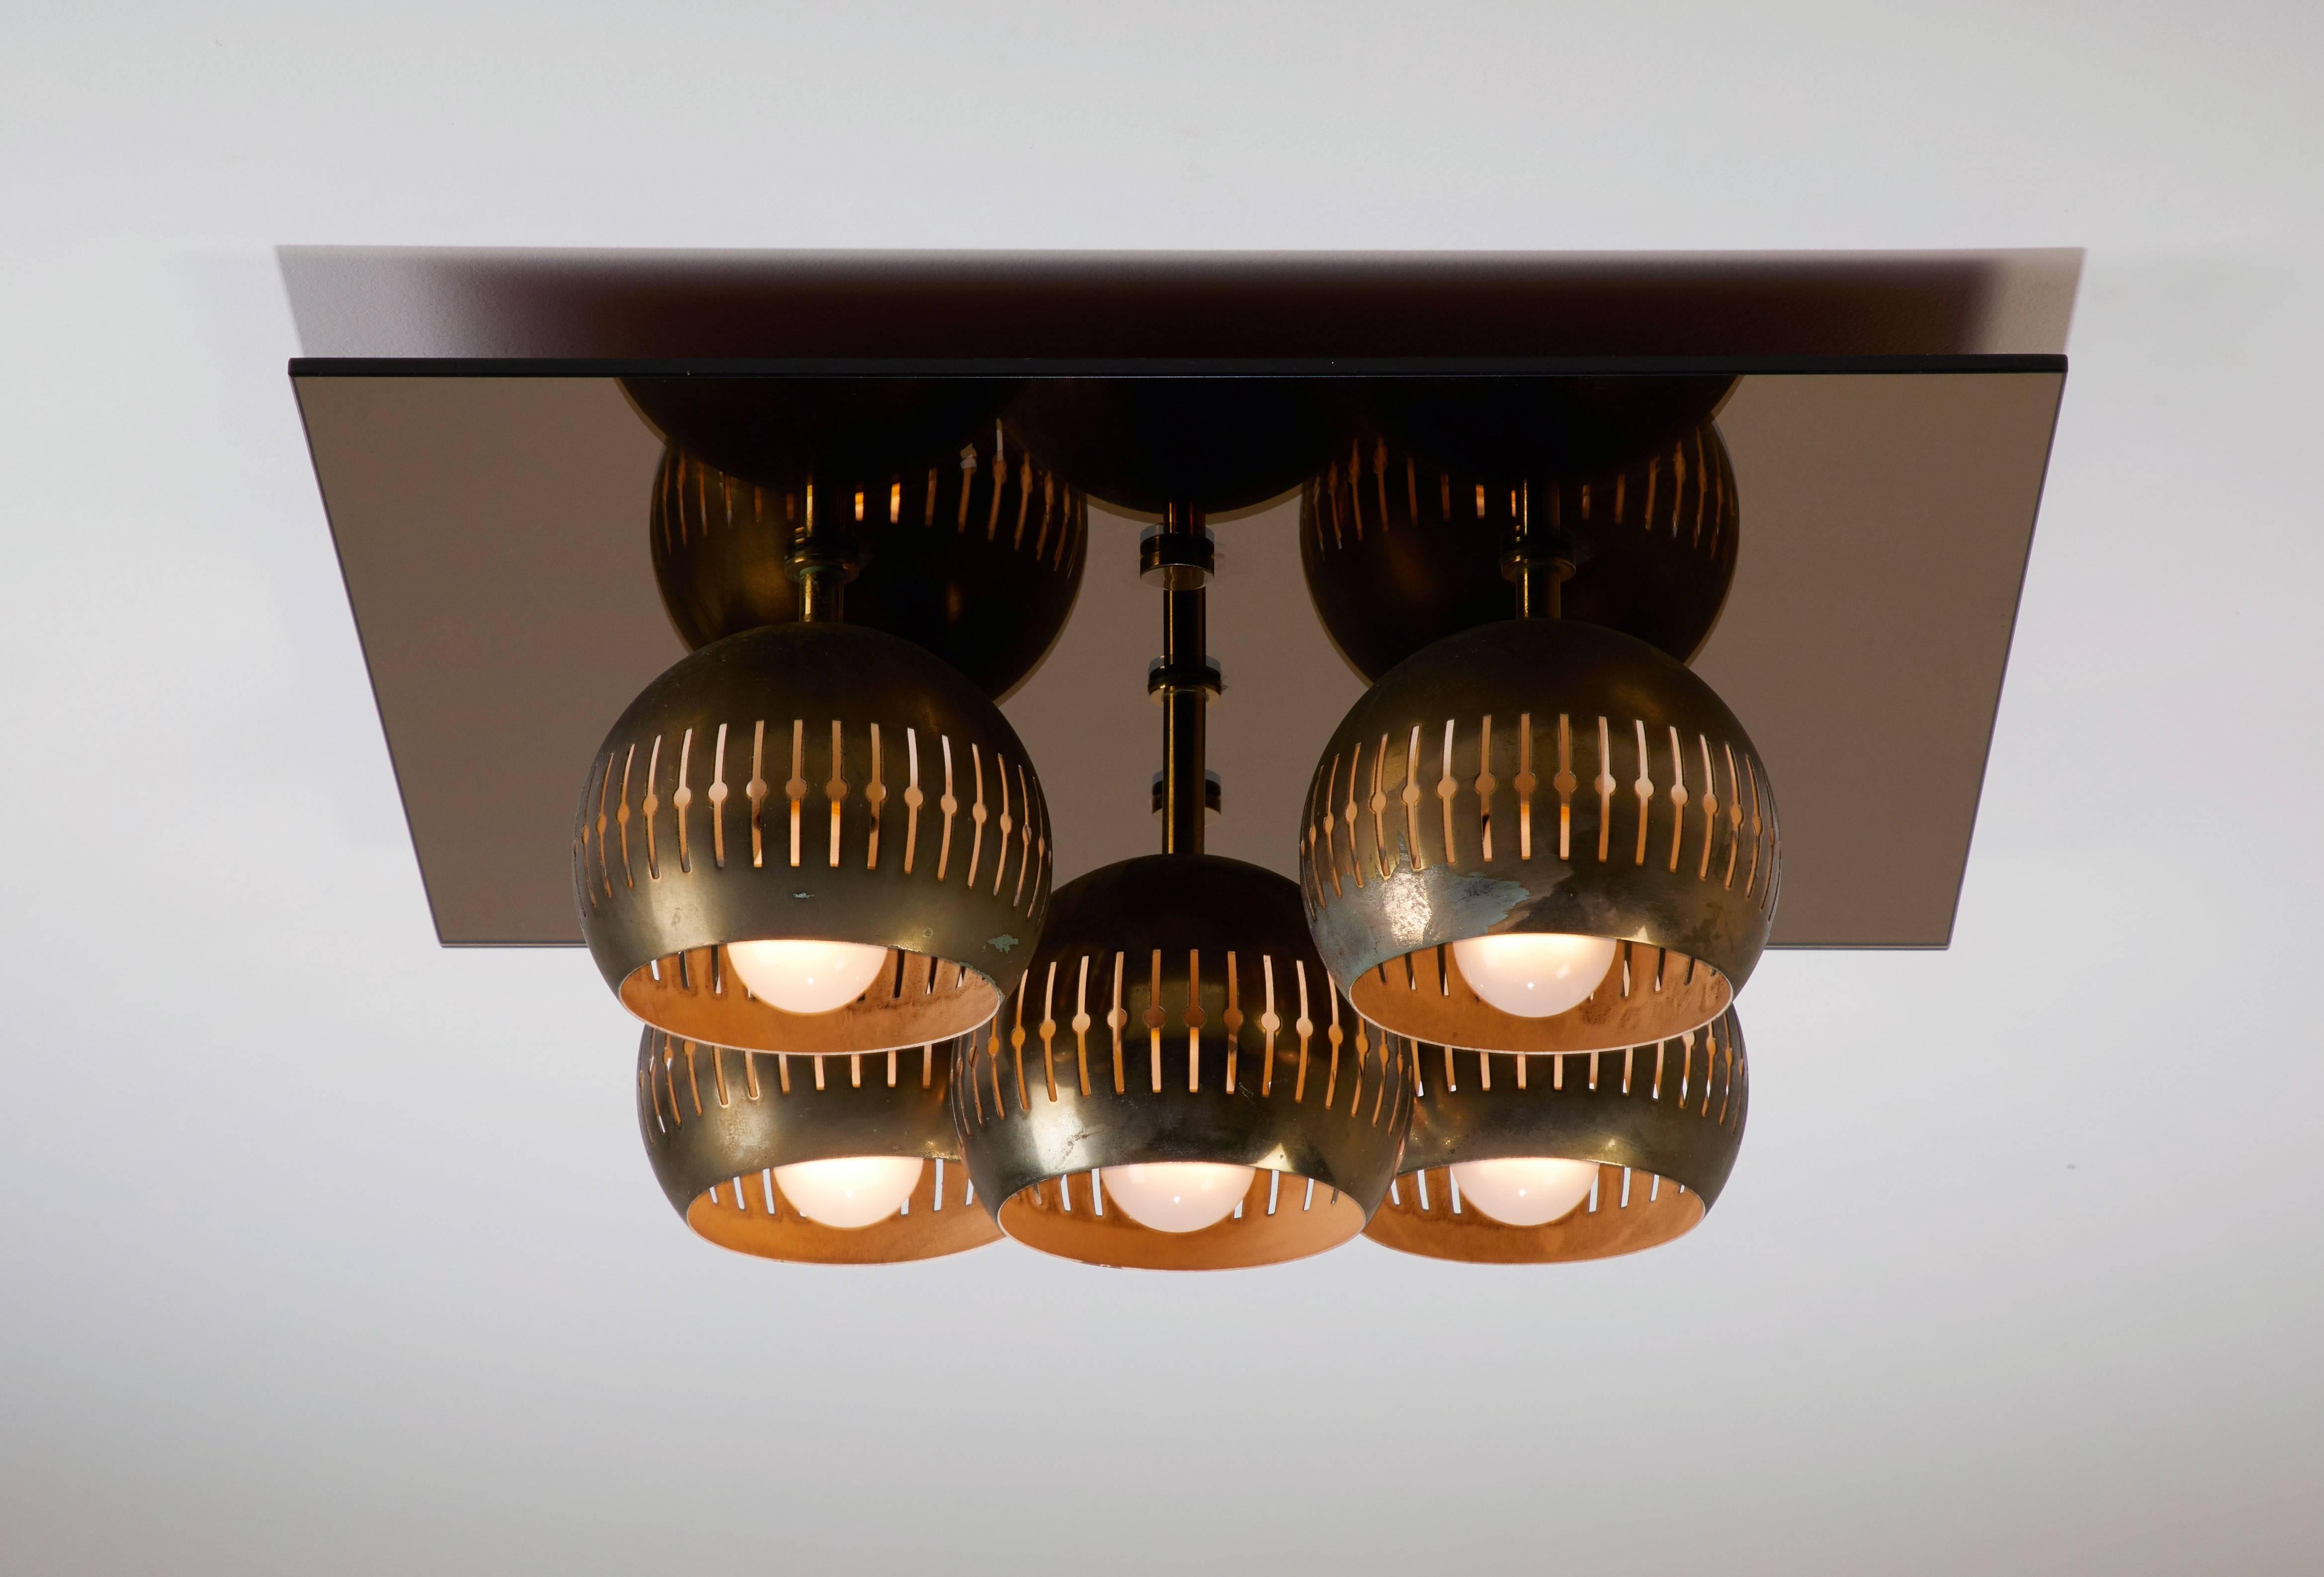 Five-shade flush mount ceiling light by Angelo Lelli for Arredoluce manufactured in Italy, circa 1960s. Mirror glass base and five perforated brass diffusers. Wired for US junction boxes. Each socket takes one E27 40w maximum bulb. Original